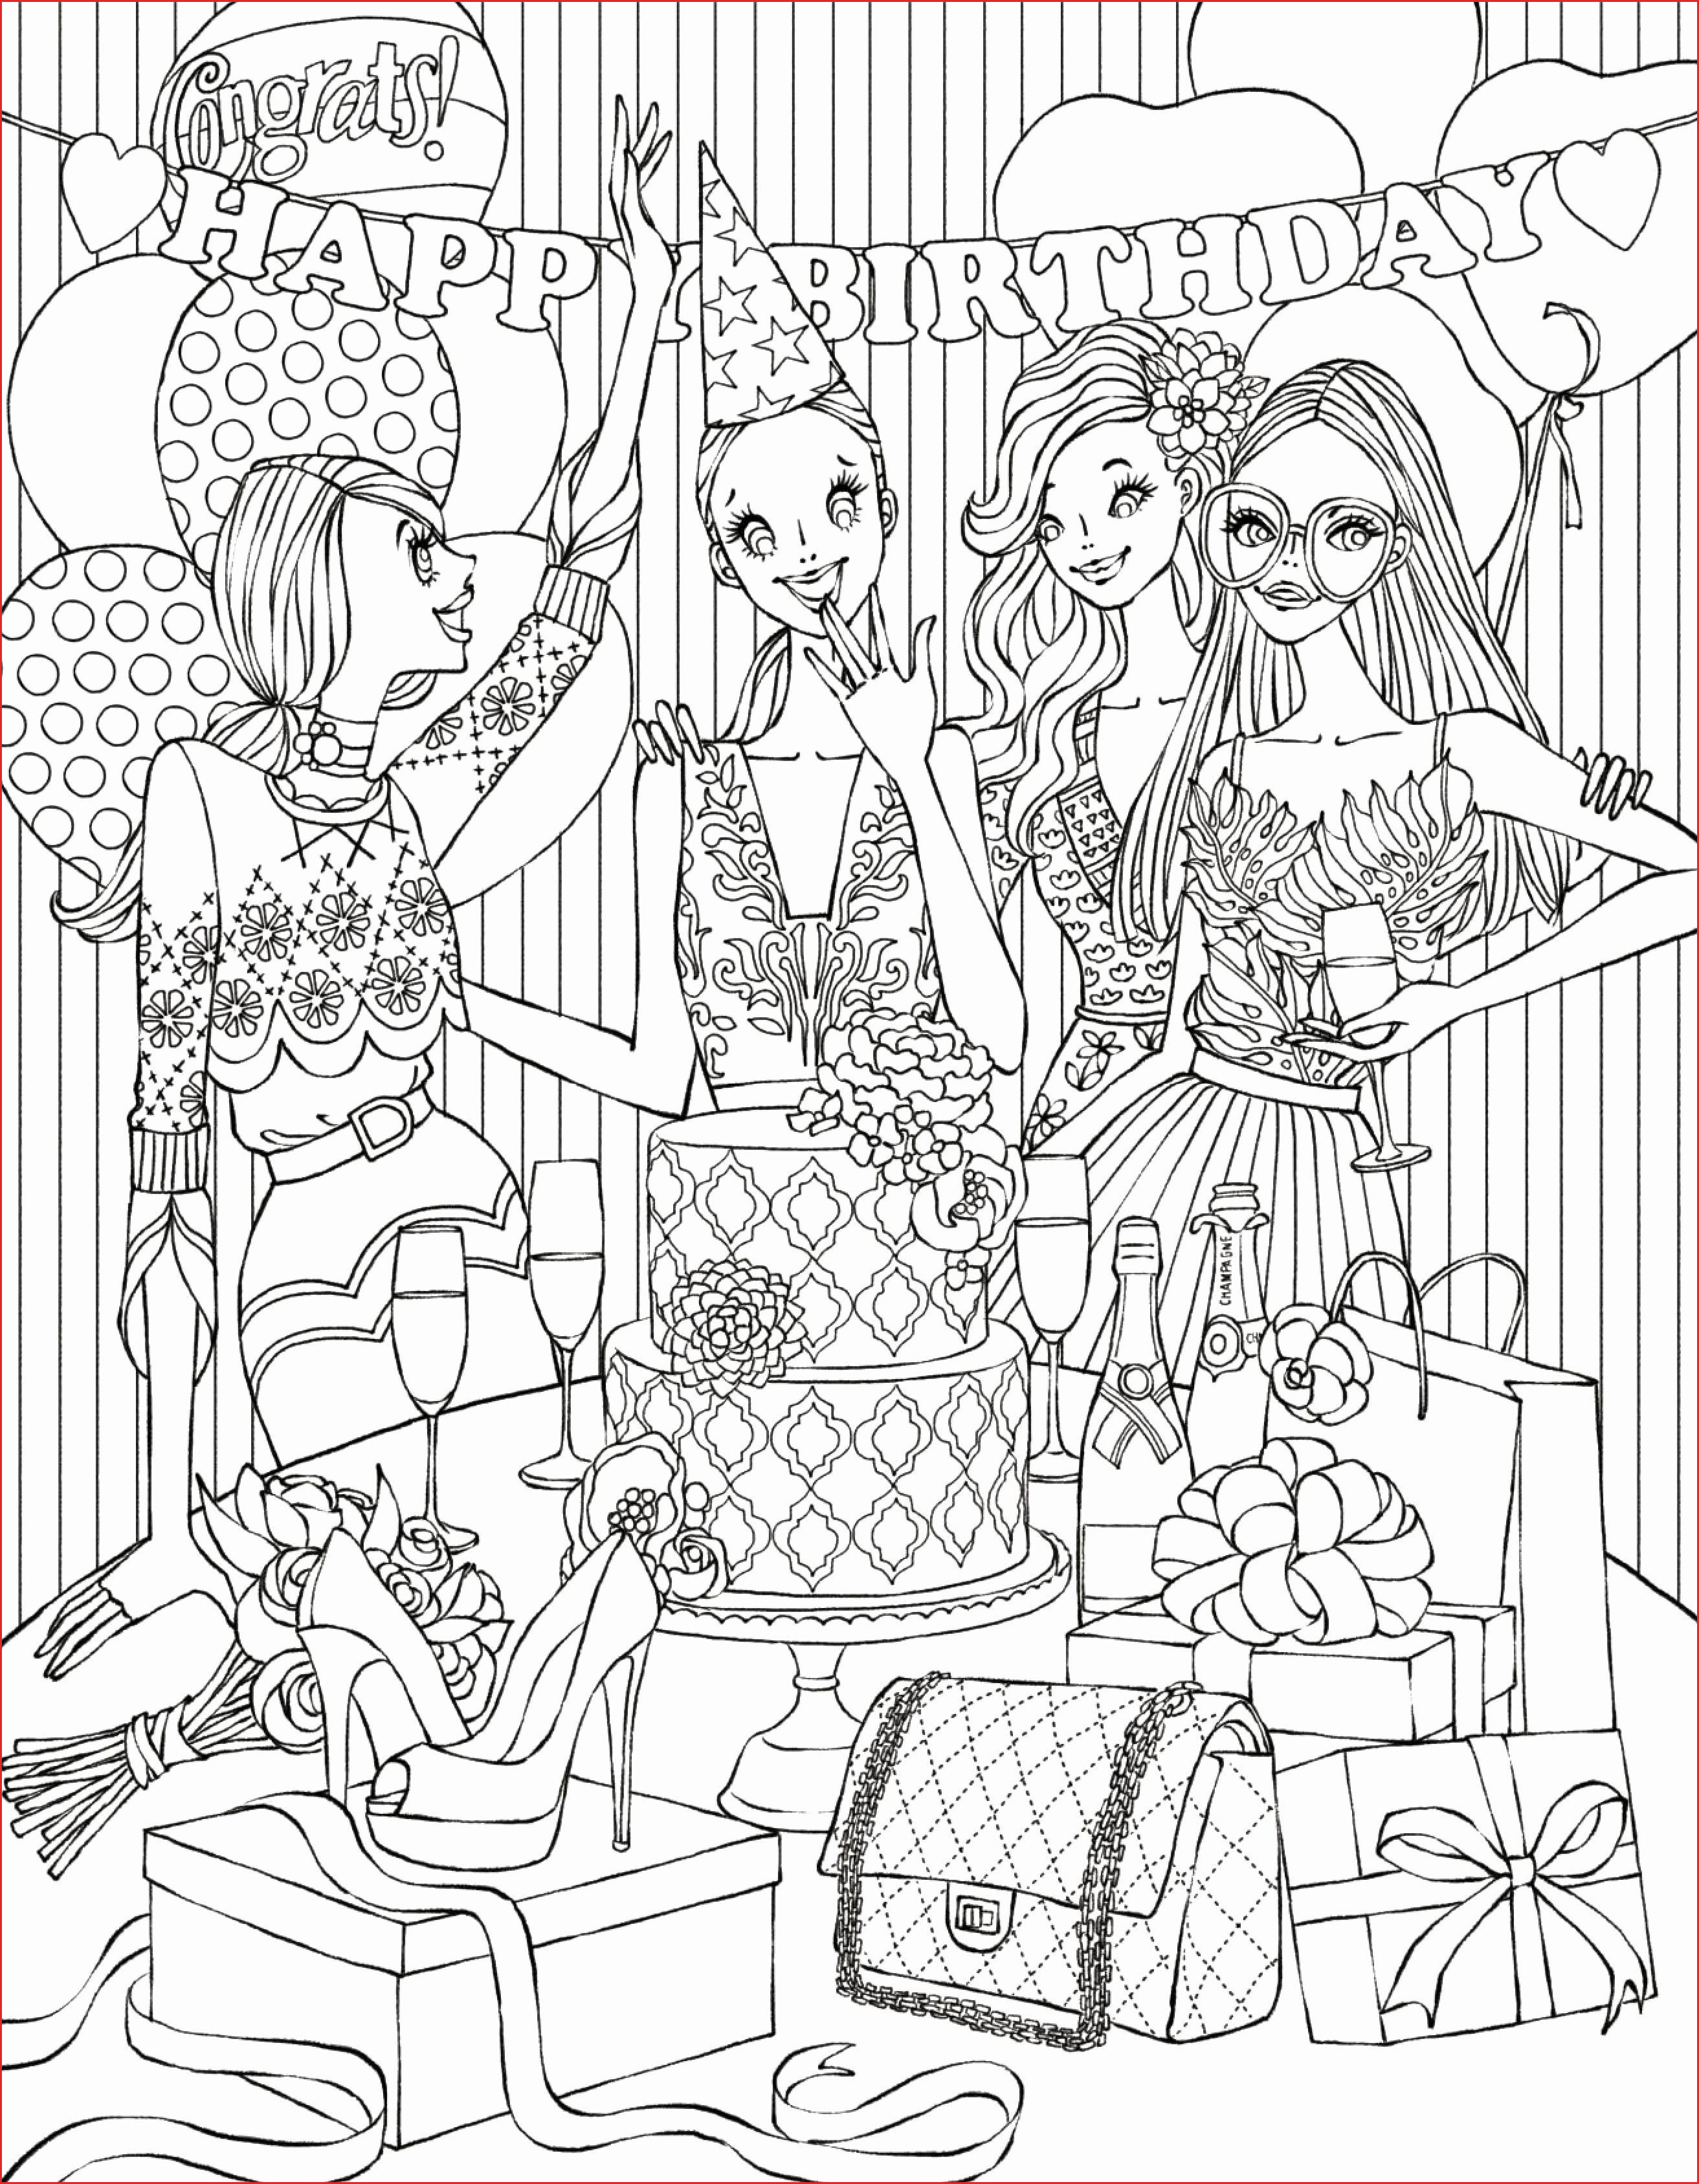 Nexo Knights Coloring Pages Lego Coloring Pages 10631 13 Luxury Lego Nexo Knights Coloring Pages